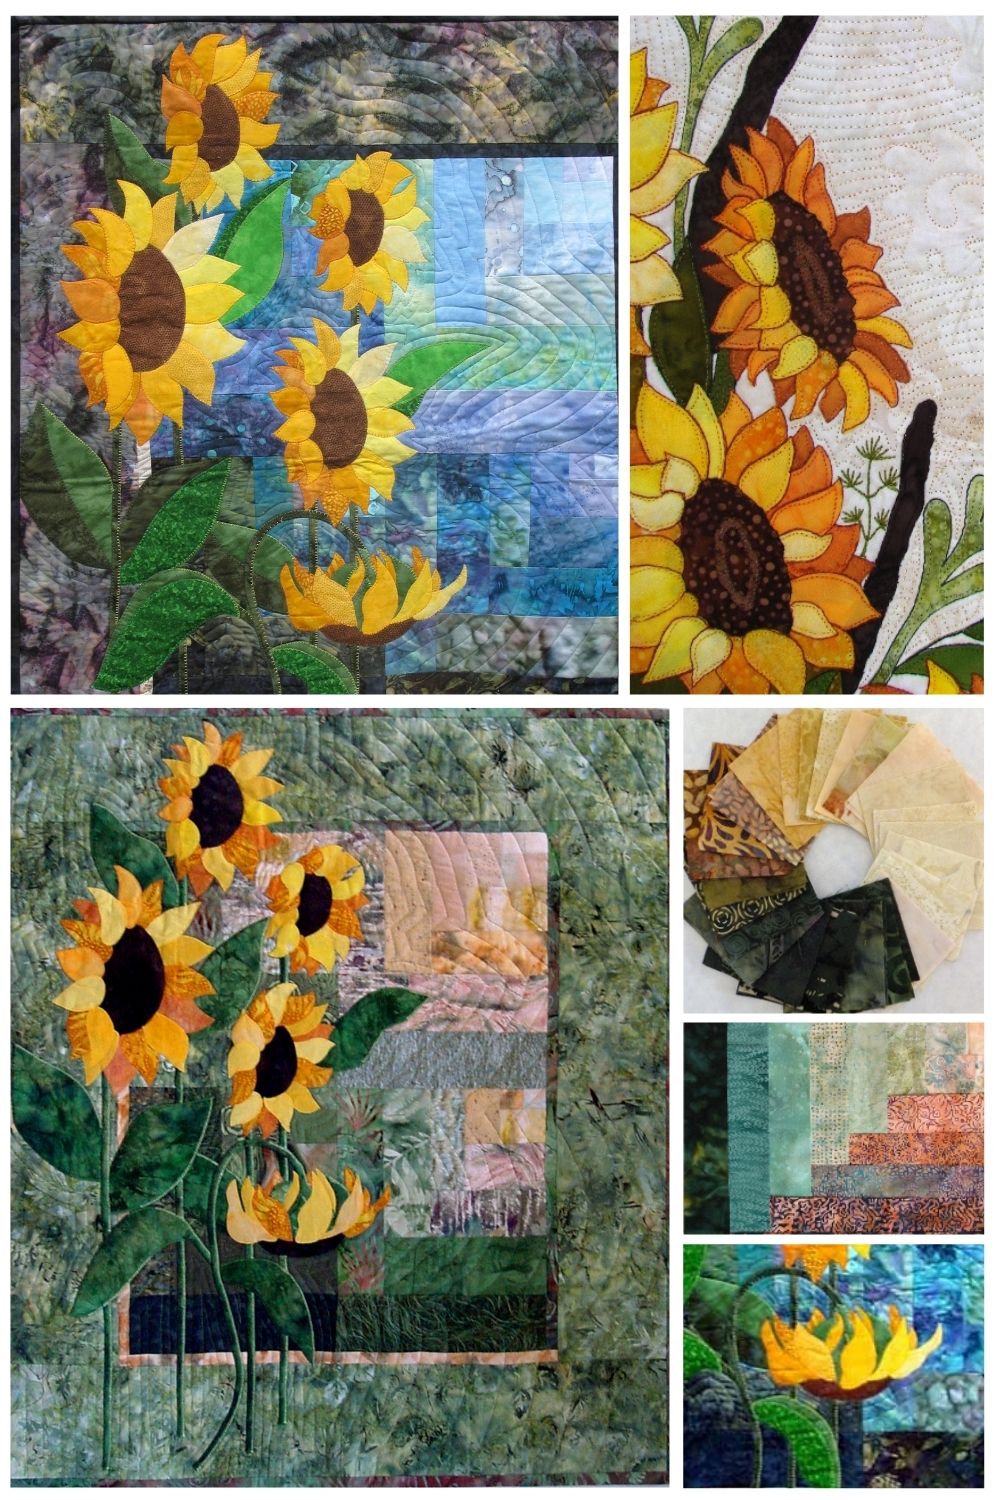 Sunflowers at Dawn is the name of Ruth Blanchet's online workshop to create her Simply Sunflowers quilt design. Sunflowers are made realistic with the detailed stitching and shading of fabrics